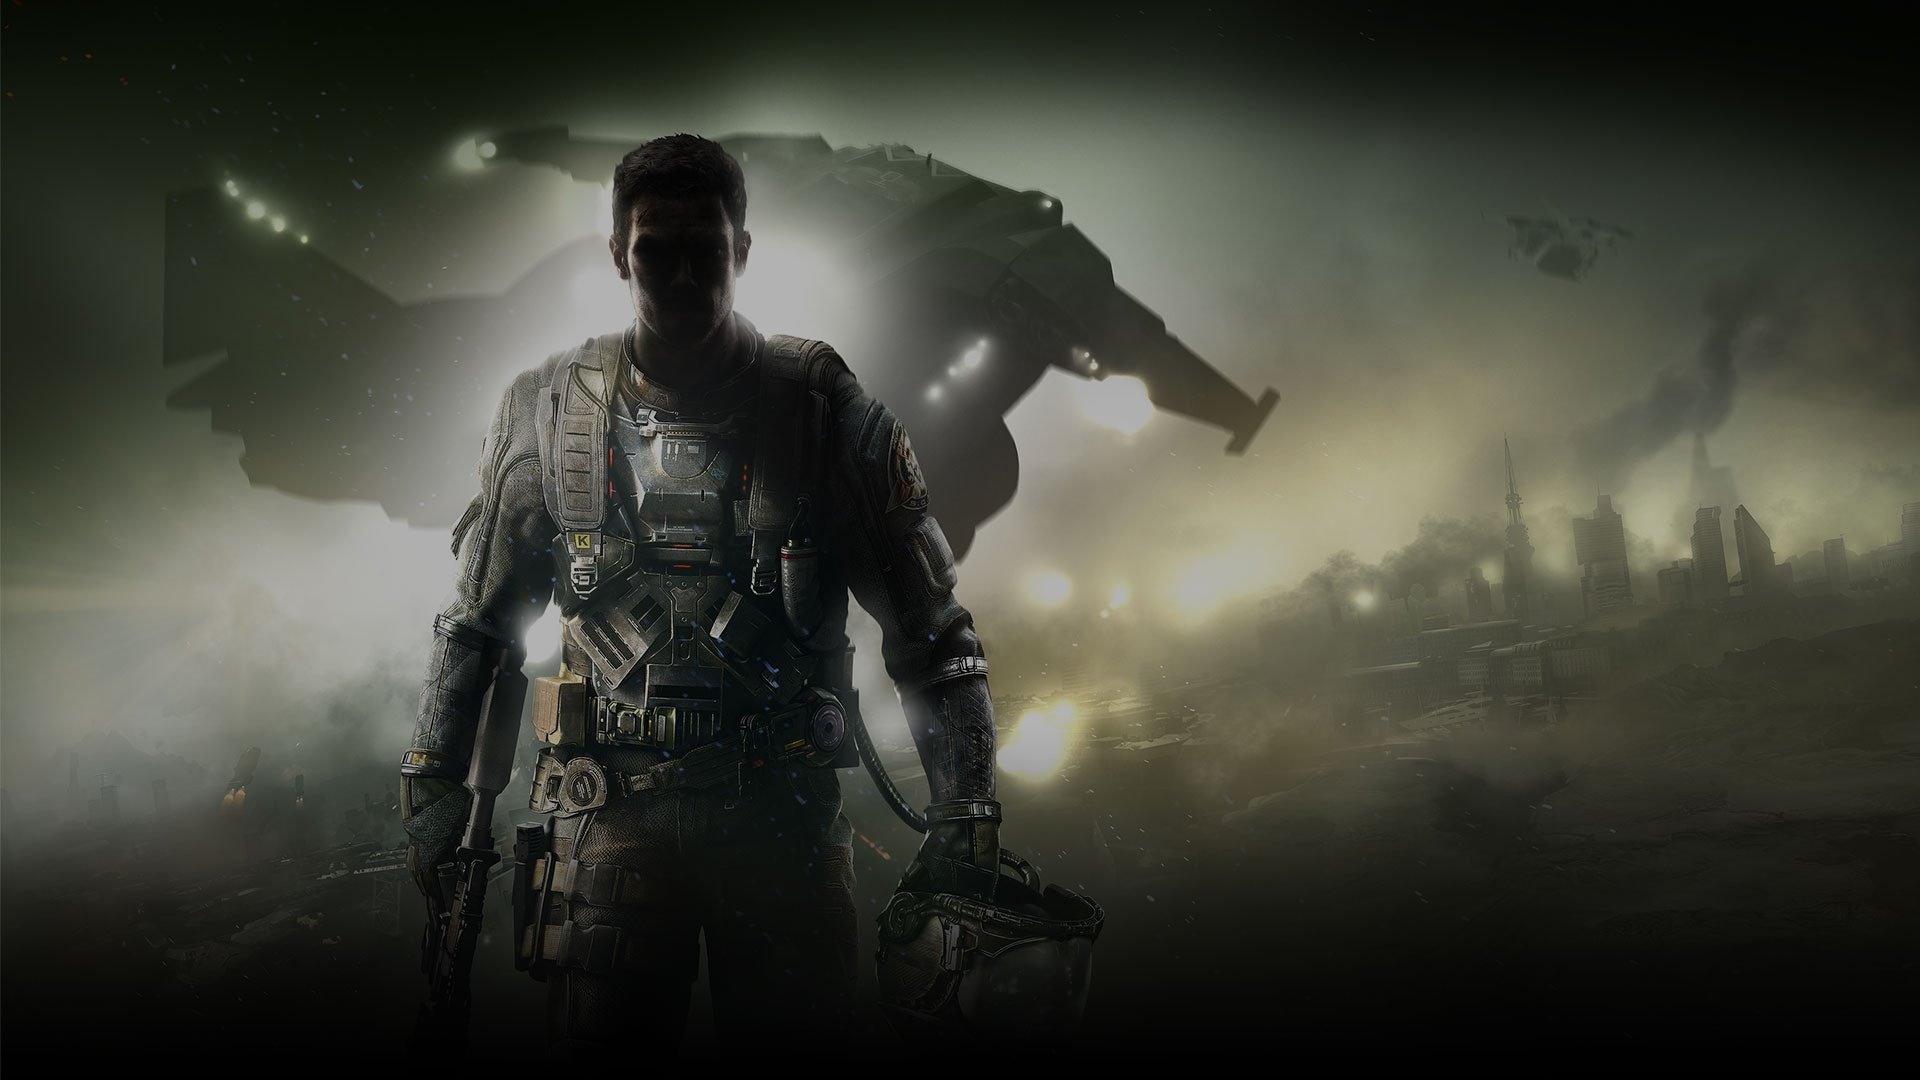 call of duty wallpaper 1920x1080,atmospheric phenomenon,darkness,photography,digital compositing,movie